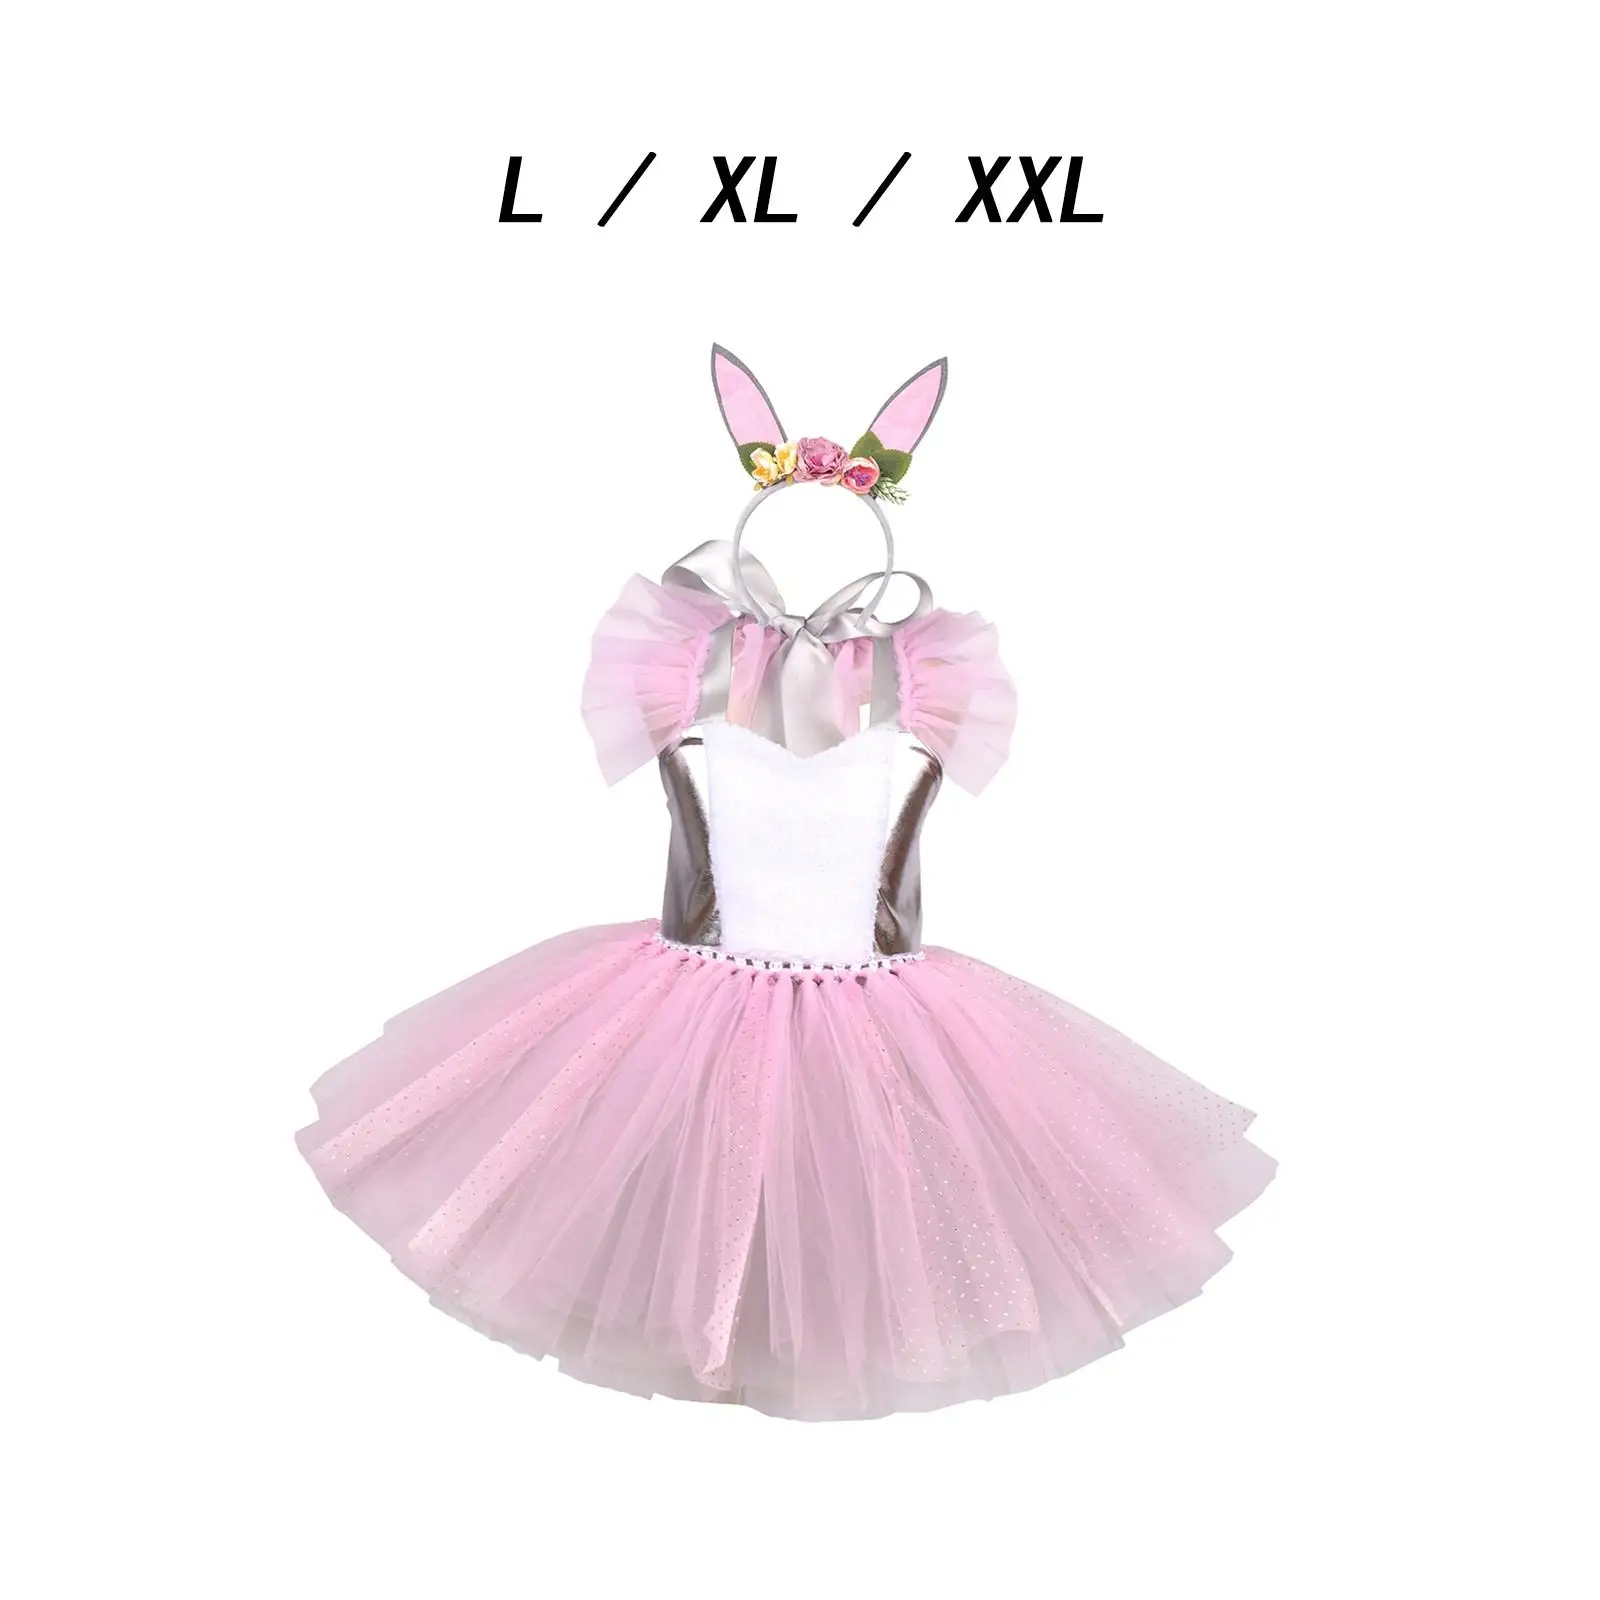 

Girl Easter Rabbit Costume Tutu Set Bunny Ears Hair Hoop Outfit, Bunny Romper Tutu Dress for Masquerade Stage Show Dancing